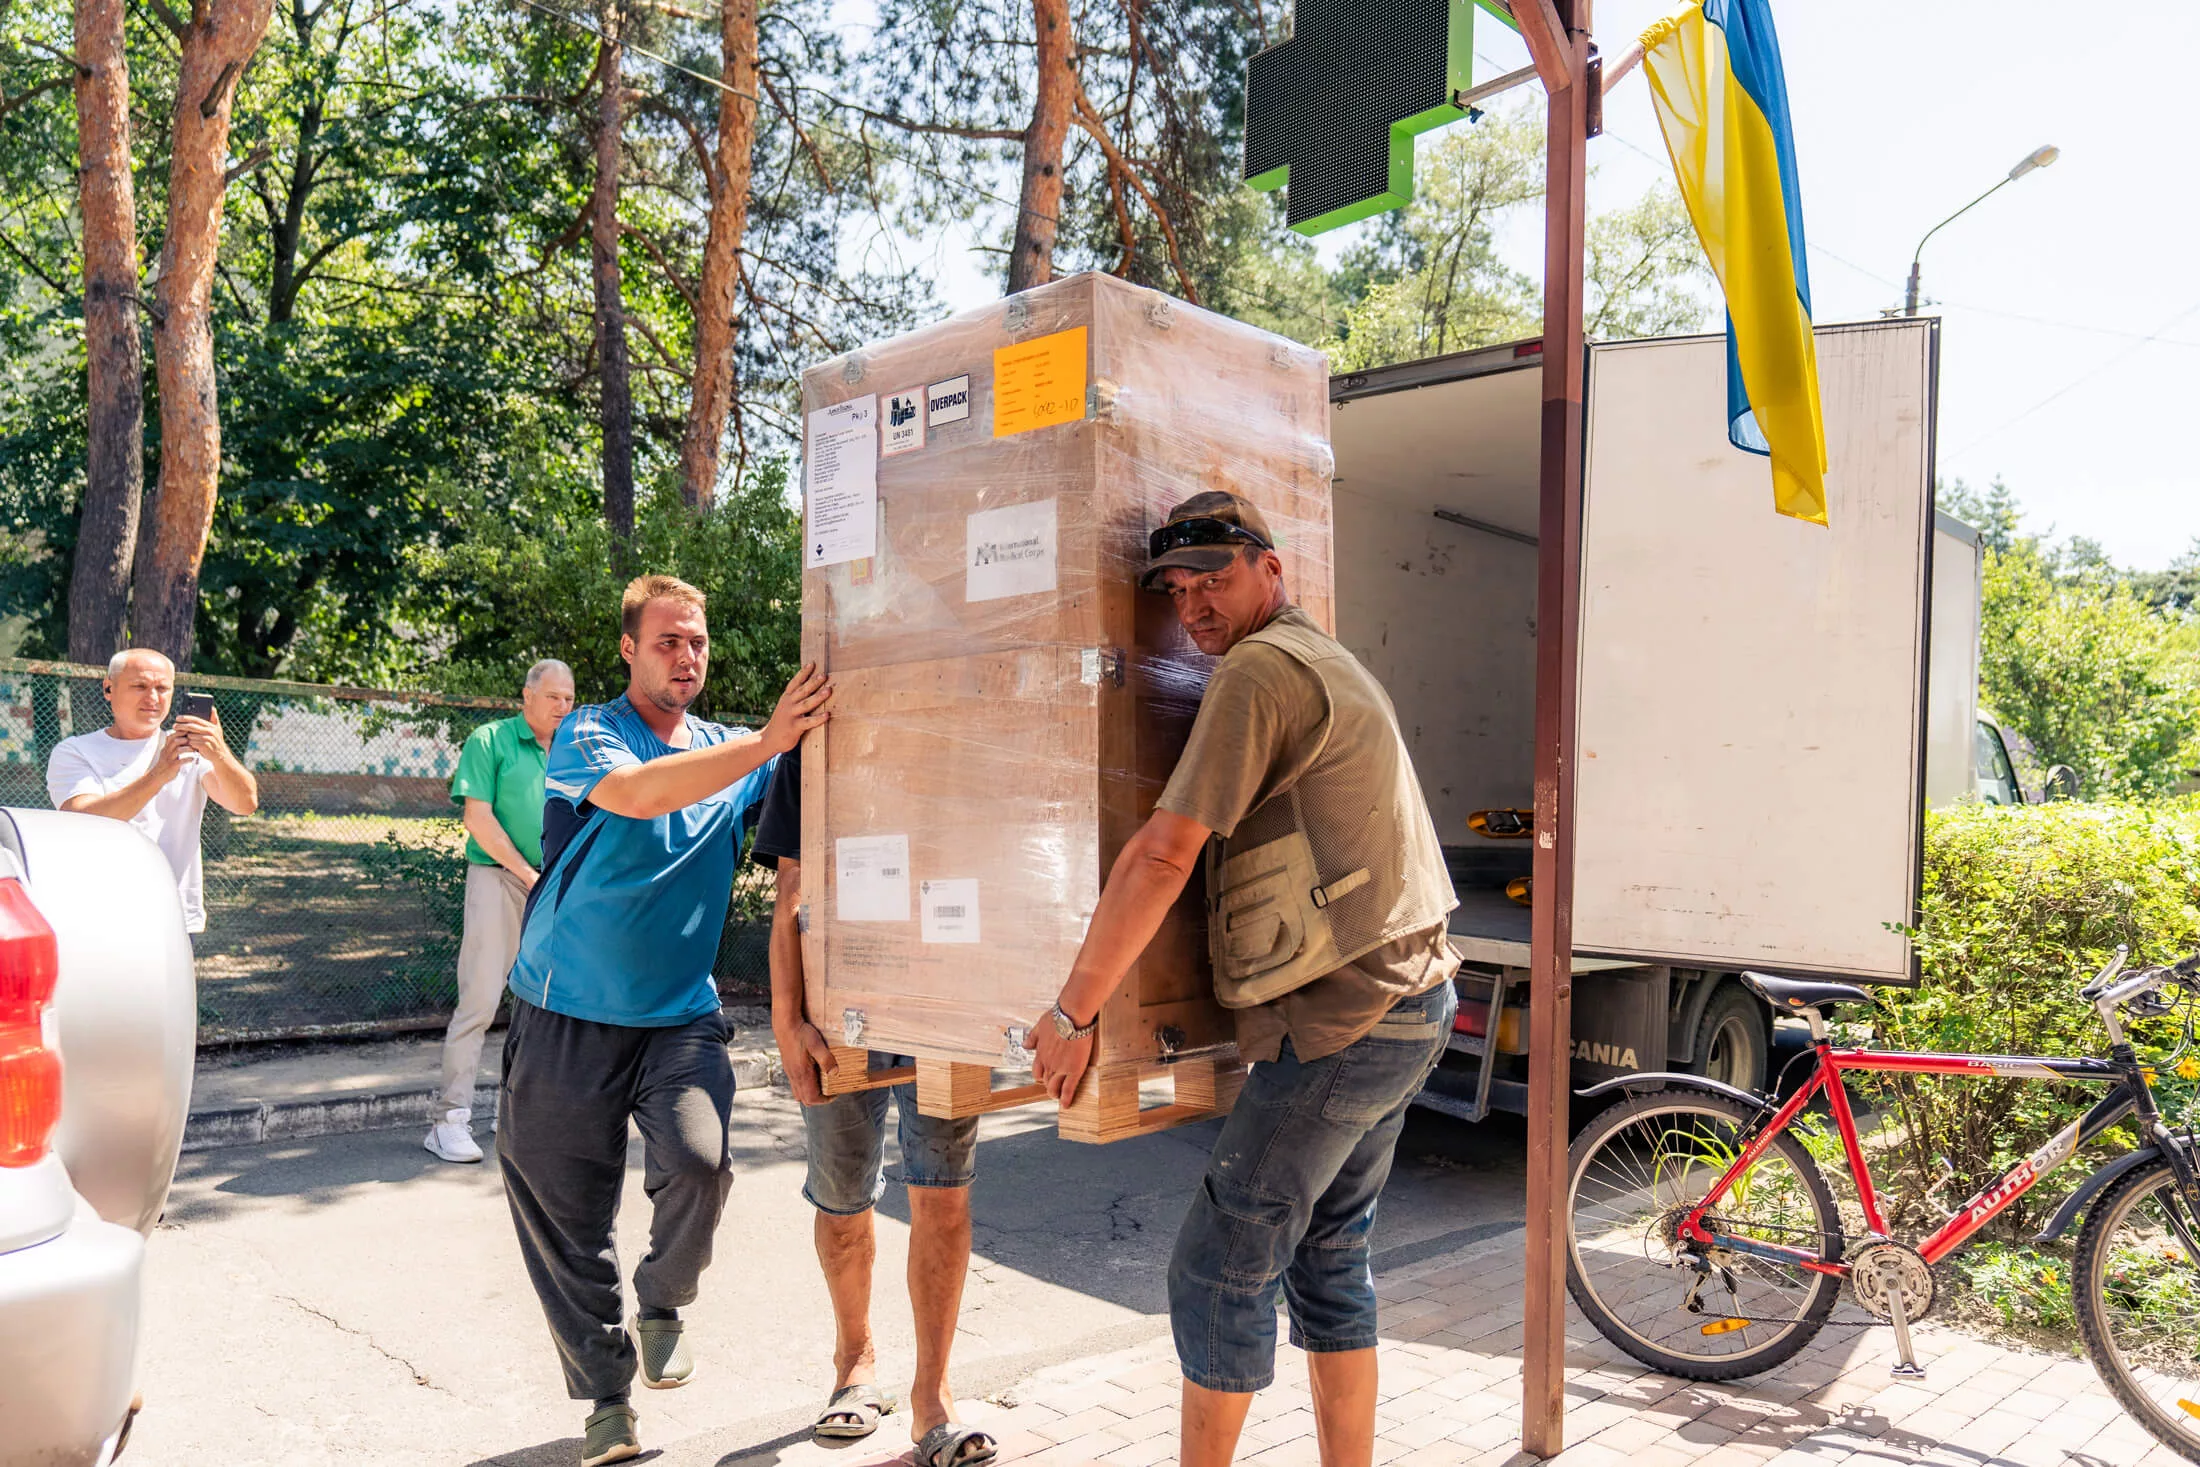 International Medical Corps staff members deliver the ultrasound machine to the clinic.